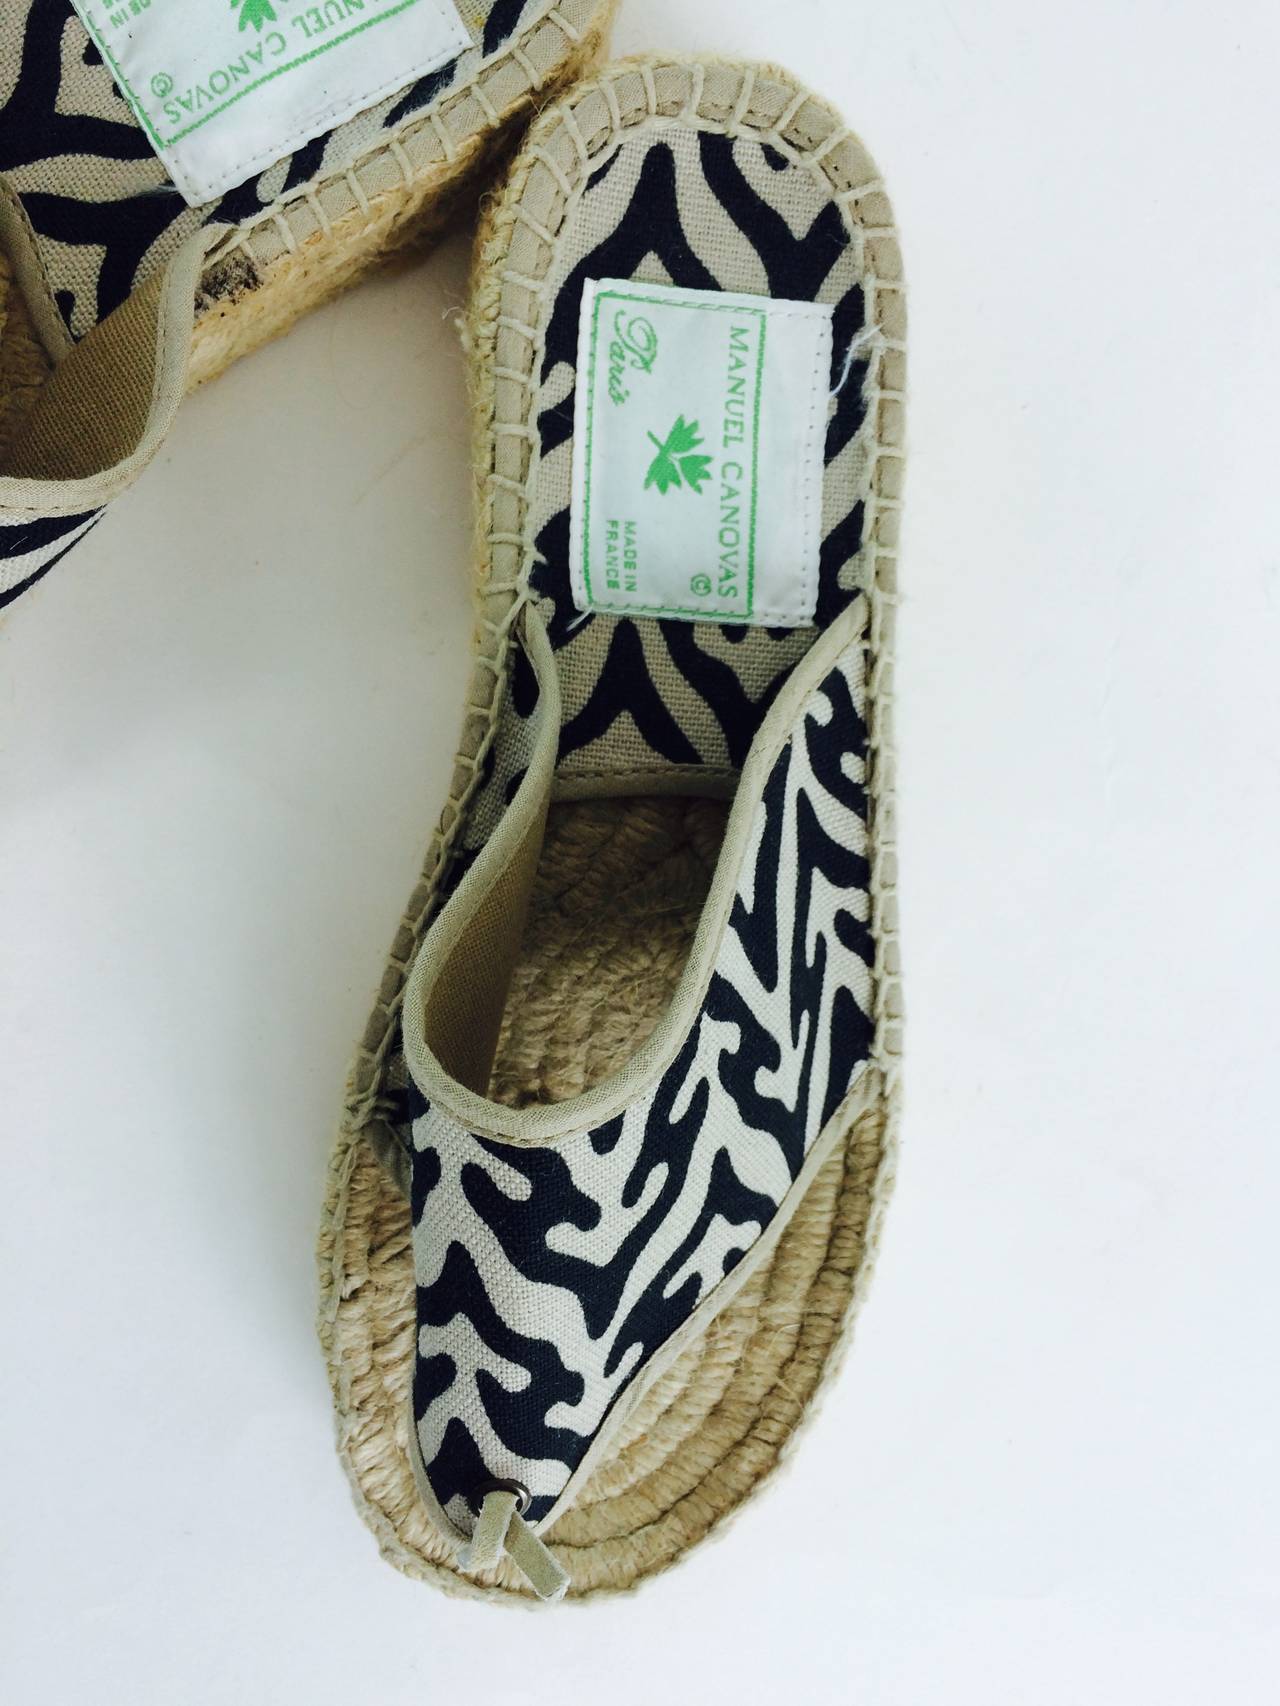 Manuel Canovas tribal print canvas thong espadrilles in off white and black...Thick woven jute sole, they look barely if ever worn...Marked size 37